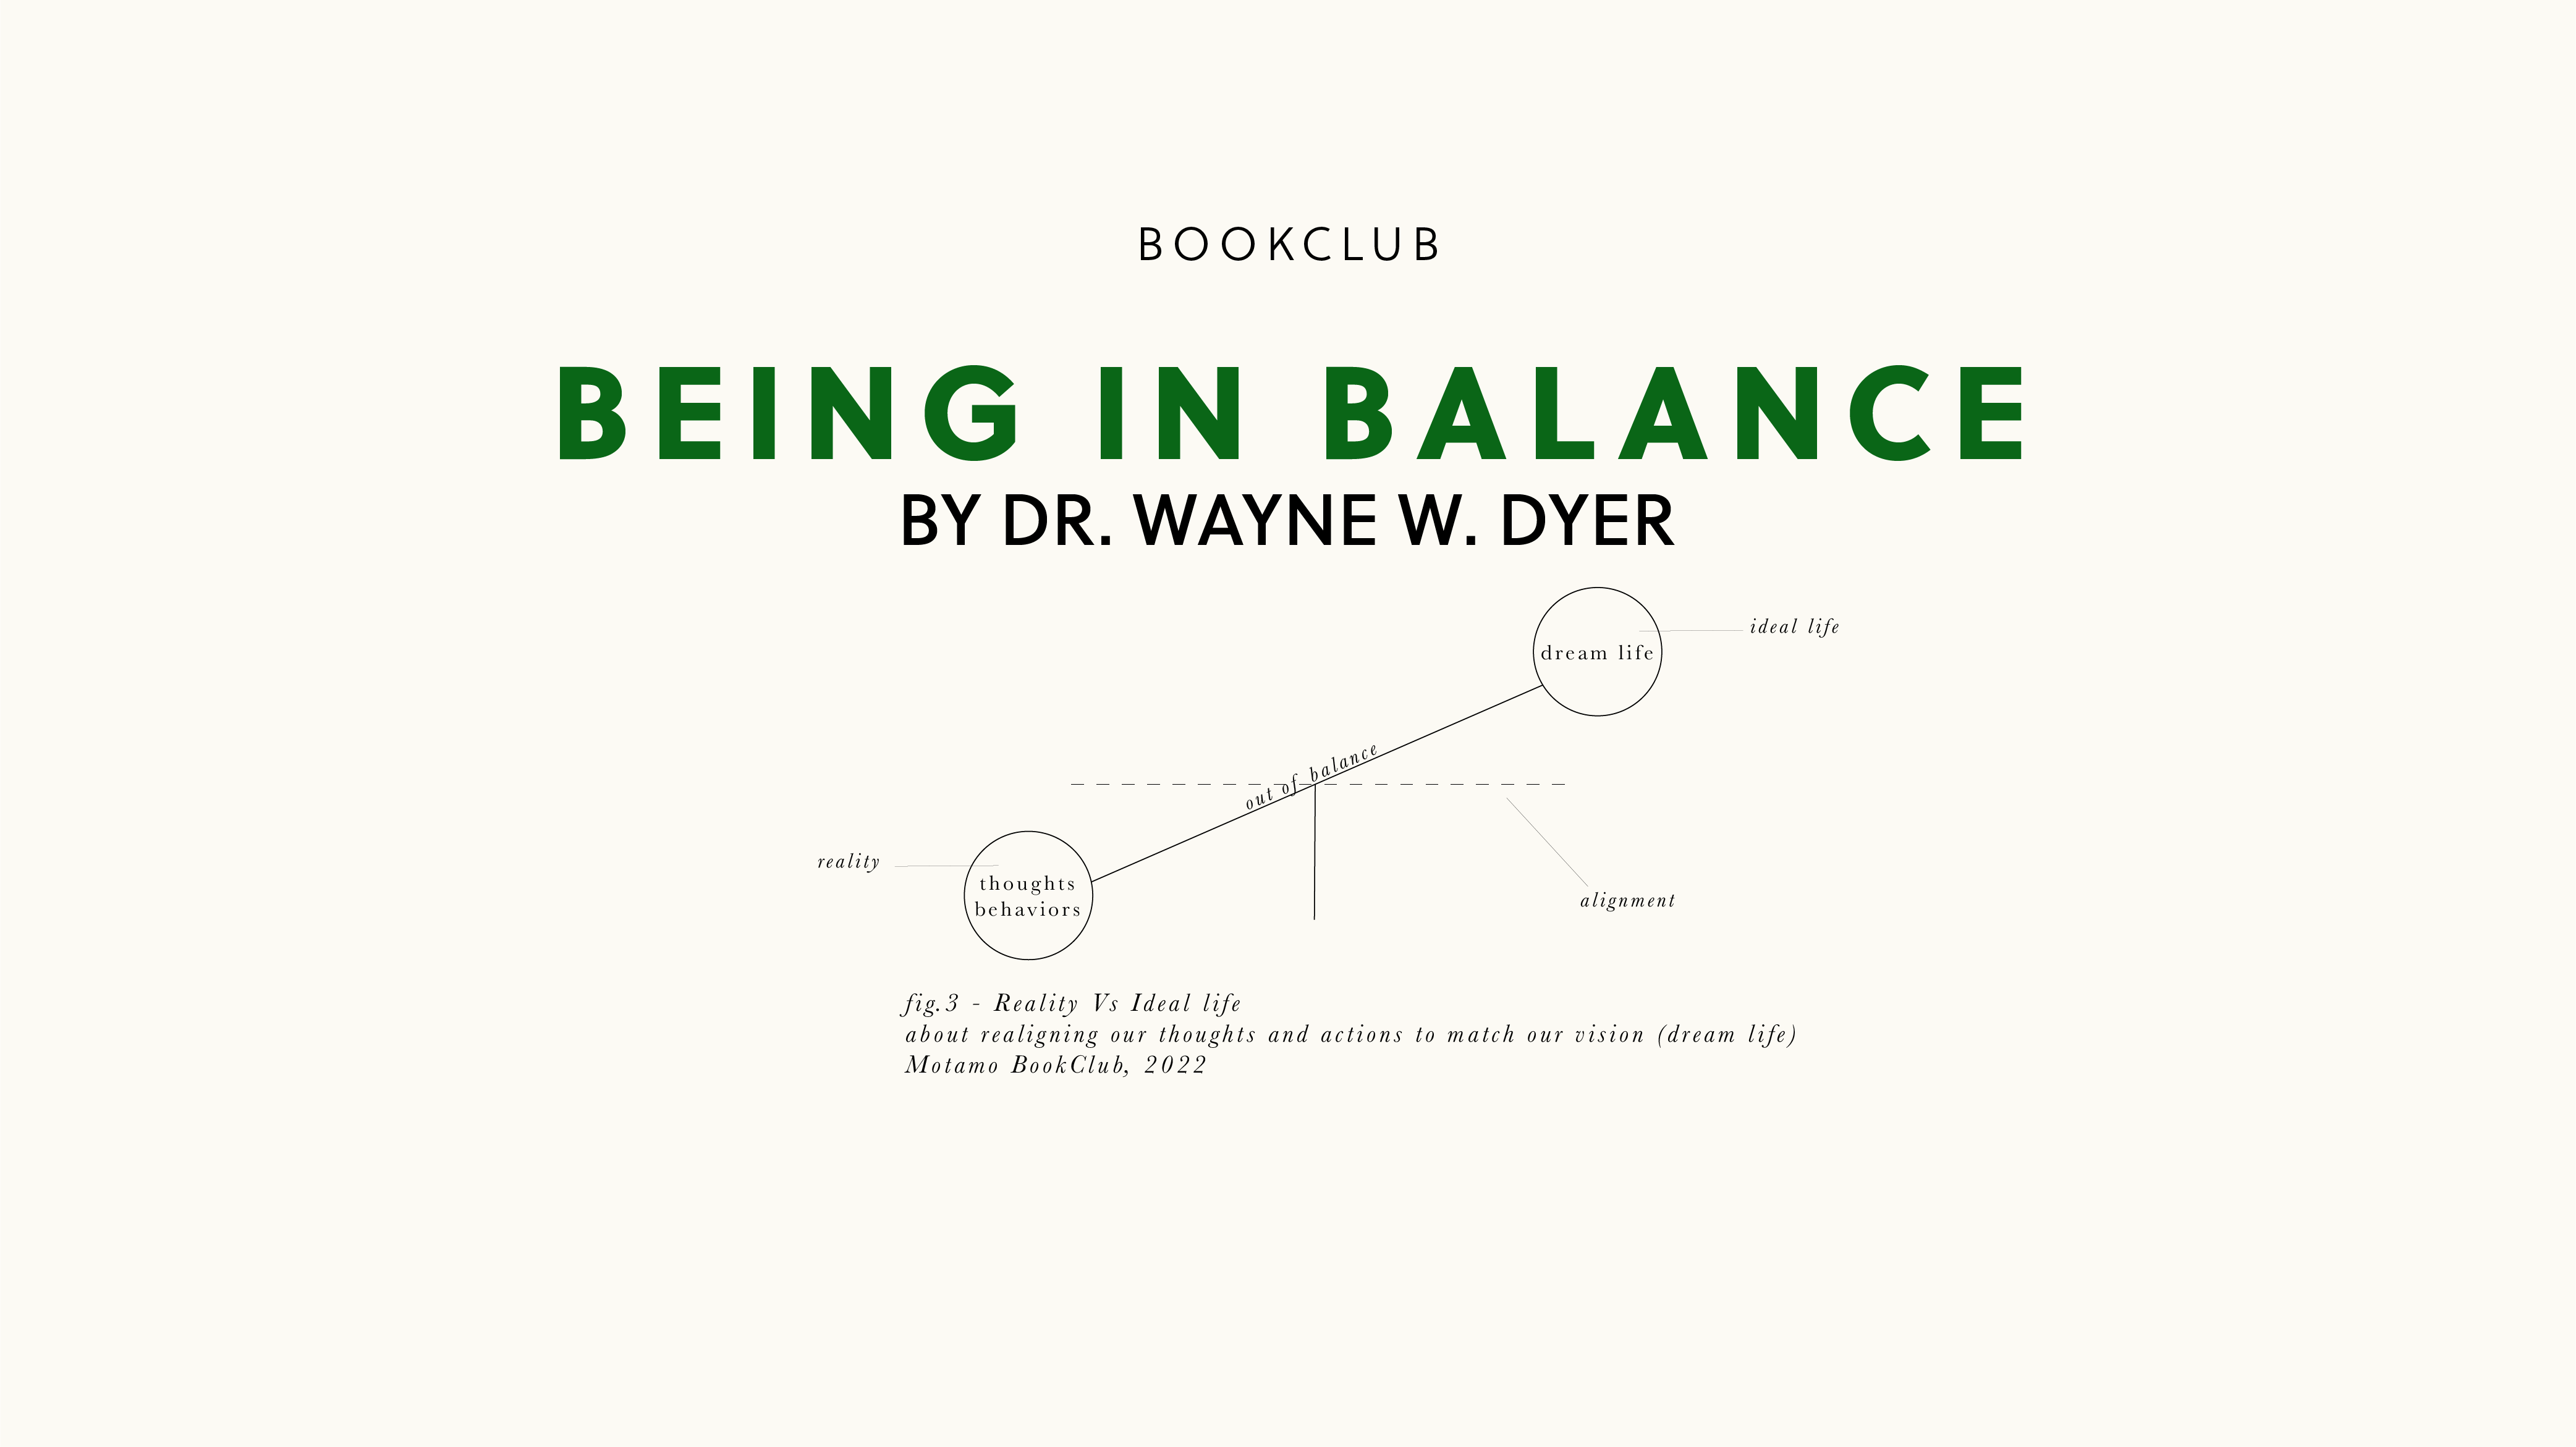 Book Club - Being in Balance